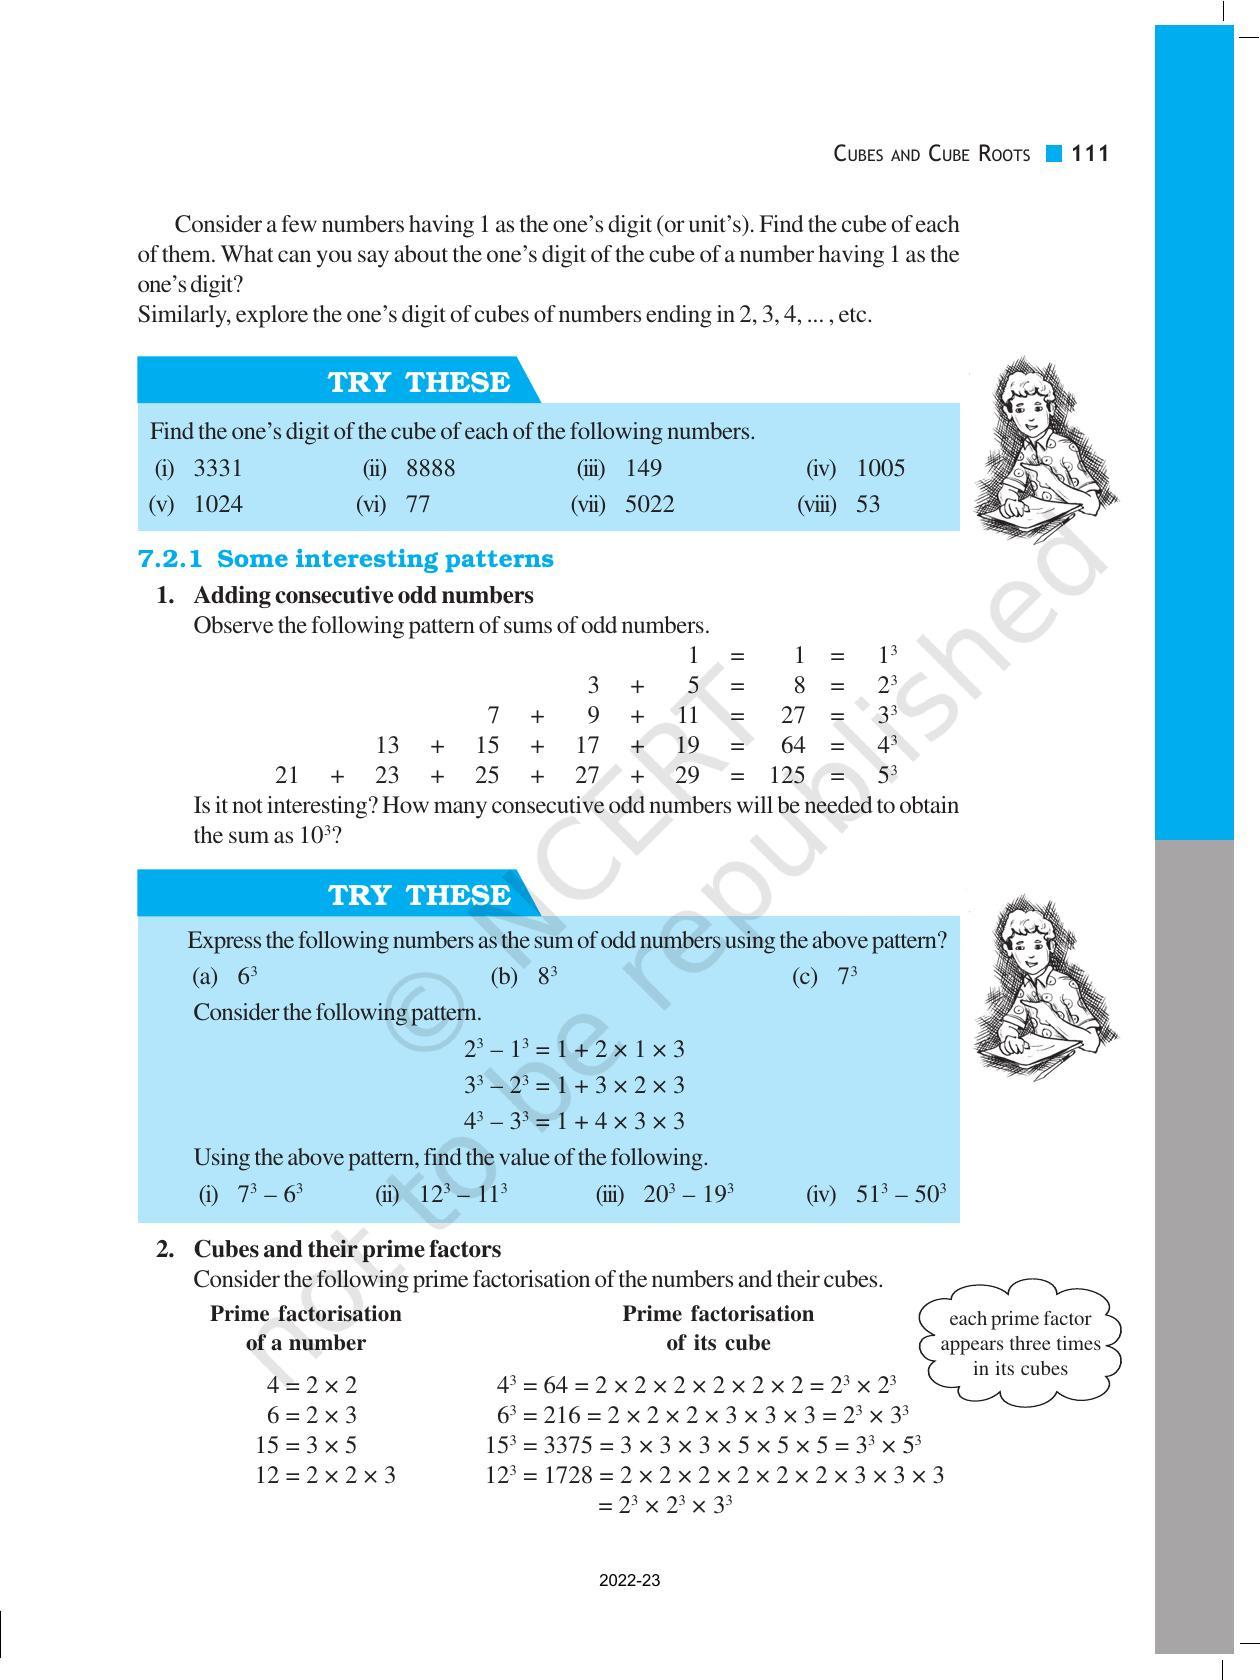 NCERT Book for Class 8 Maths Chapter 7 Cubes and Cube Roots - Page 3